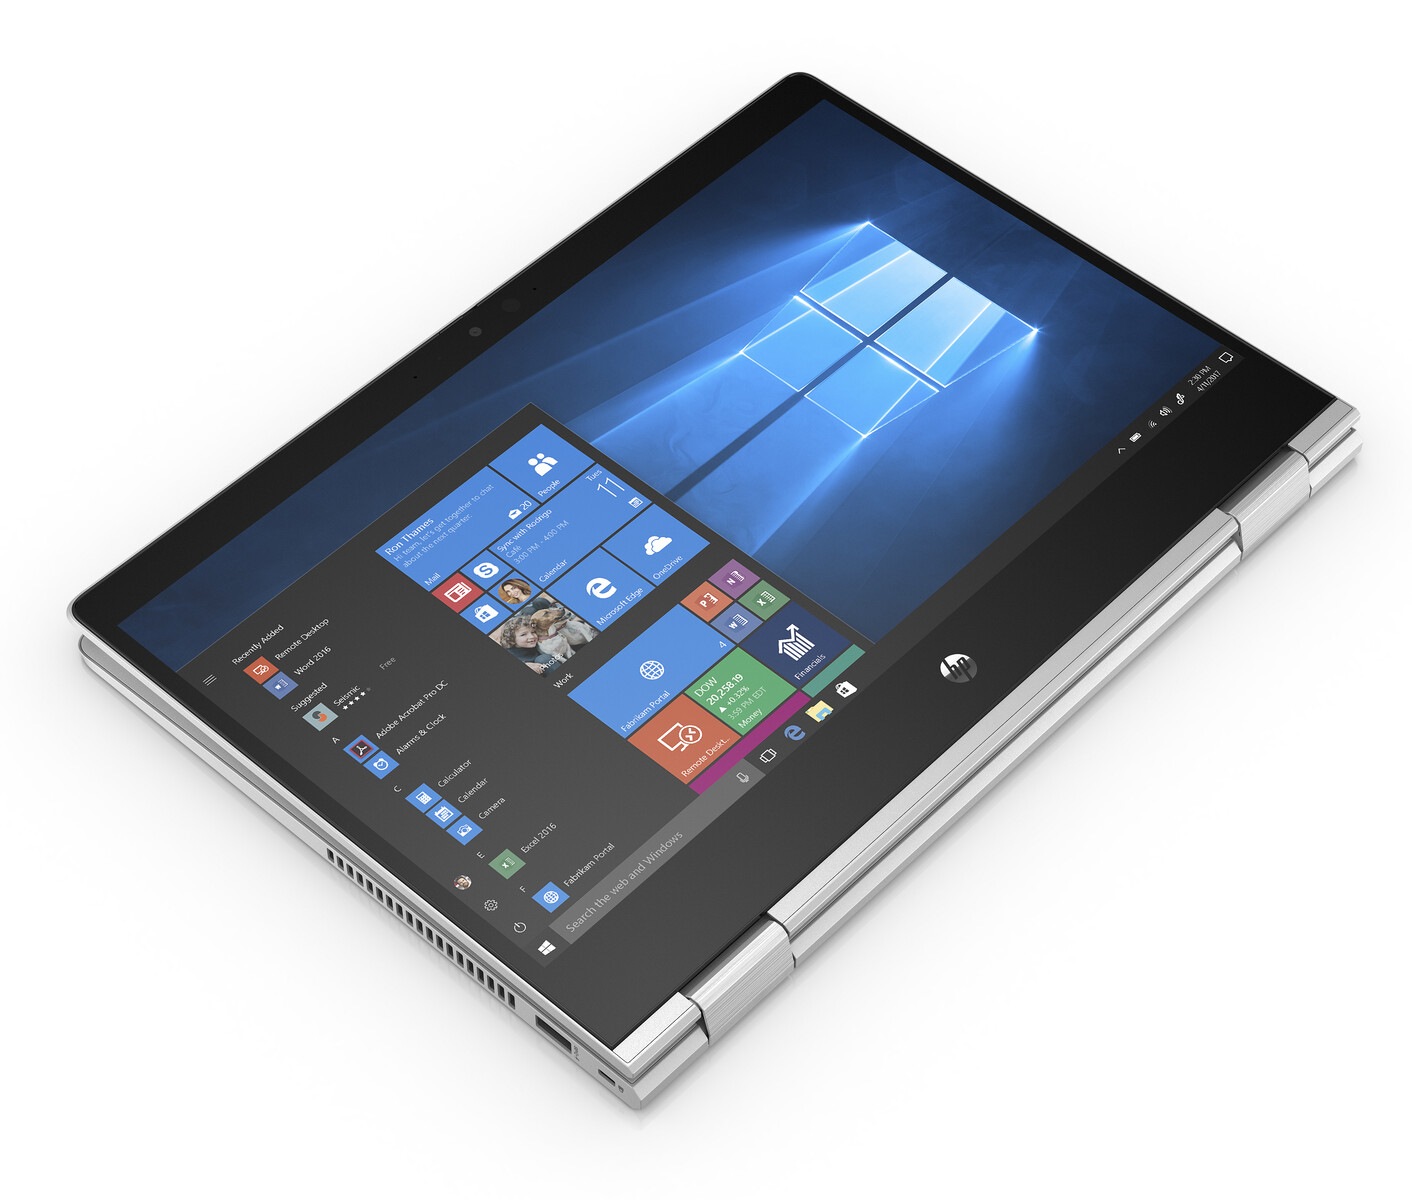 4G LTE on a budget: 2020 HP Pavilion x360 14 will have WAN options ...